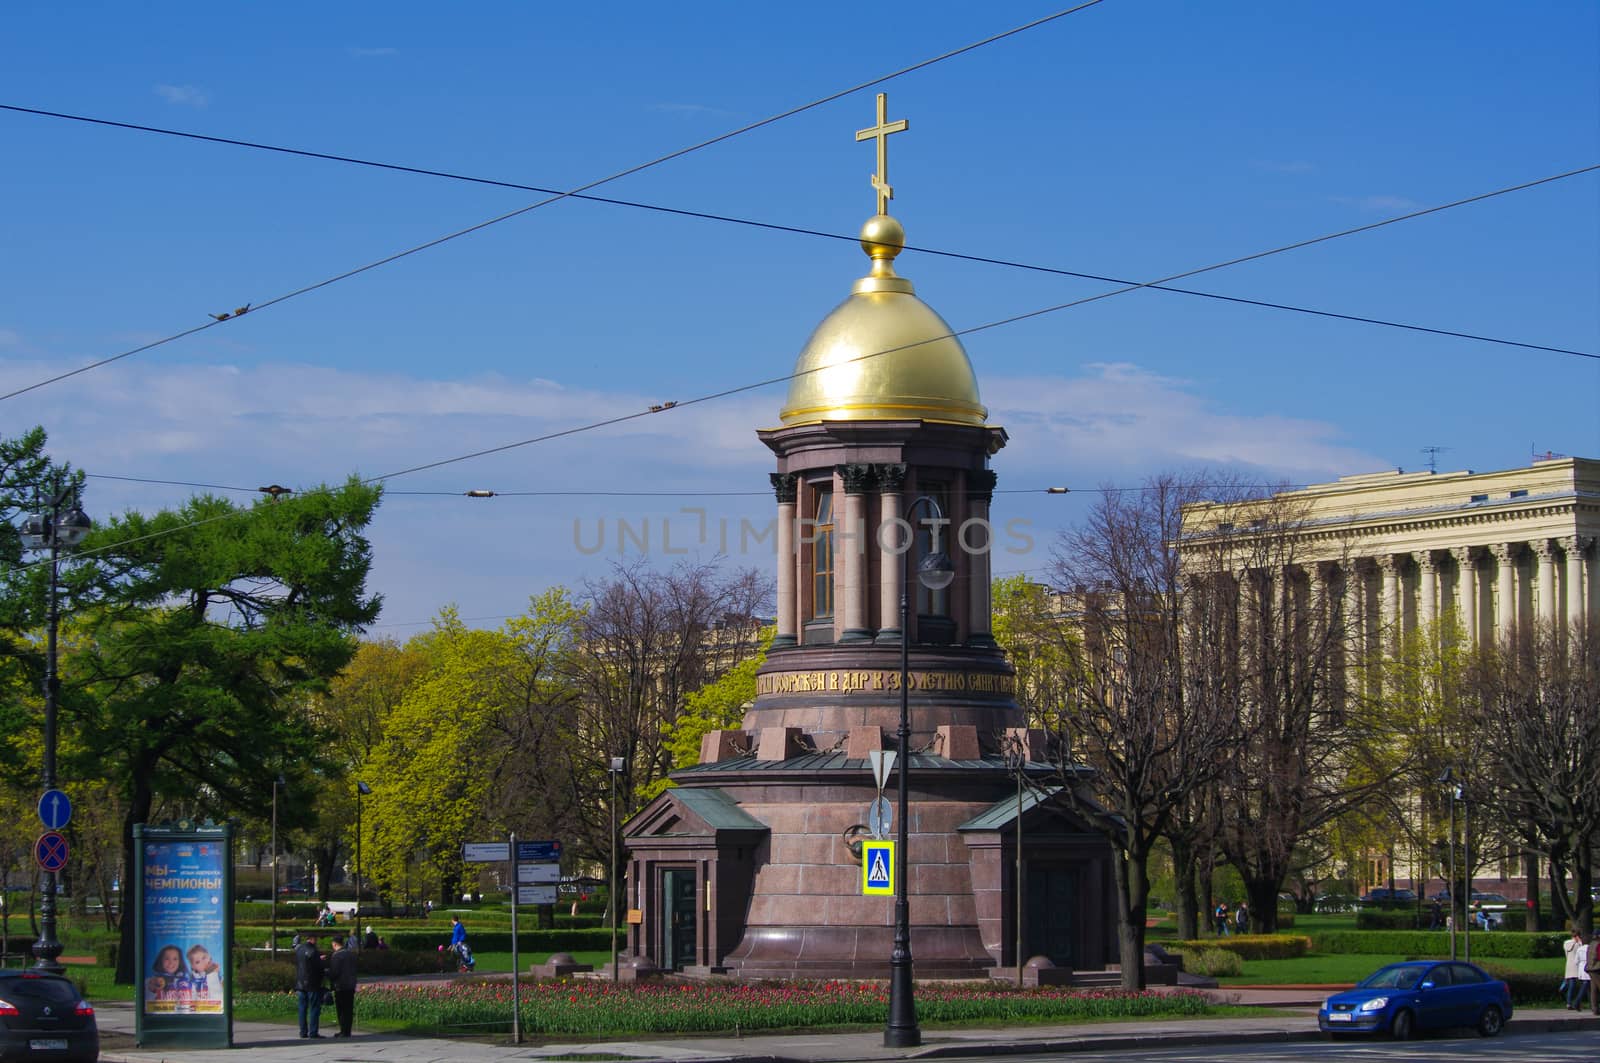 SAINT PETERSBURG, RUSSIA - MAY 10, 2014: little round dome orthodox church on the road. by evolutionnow